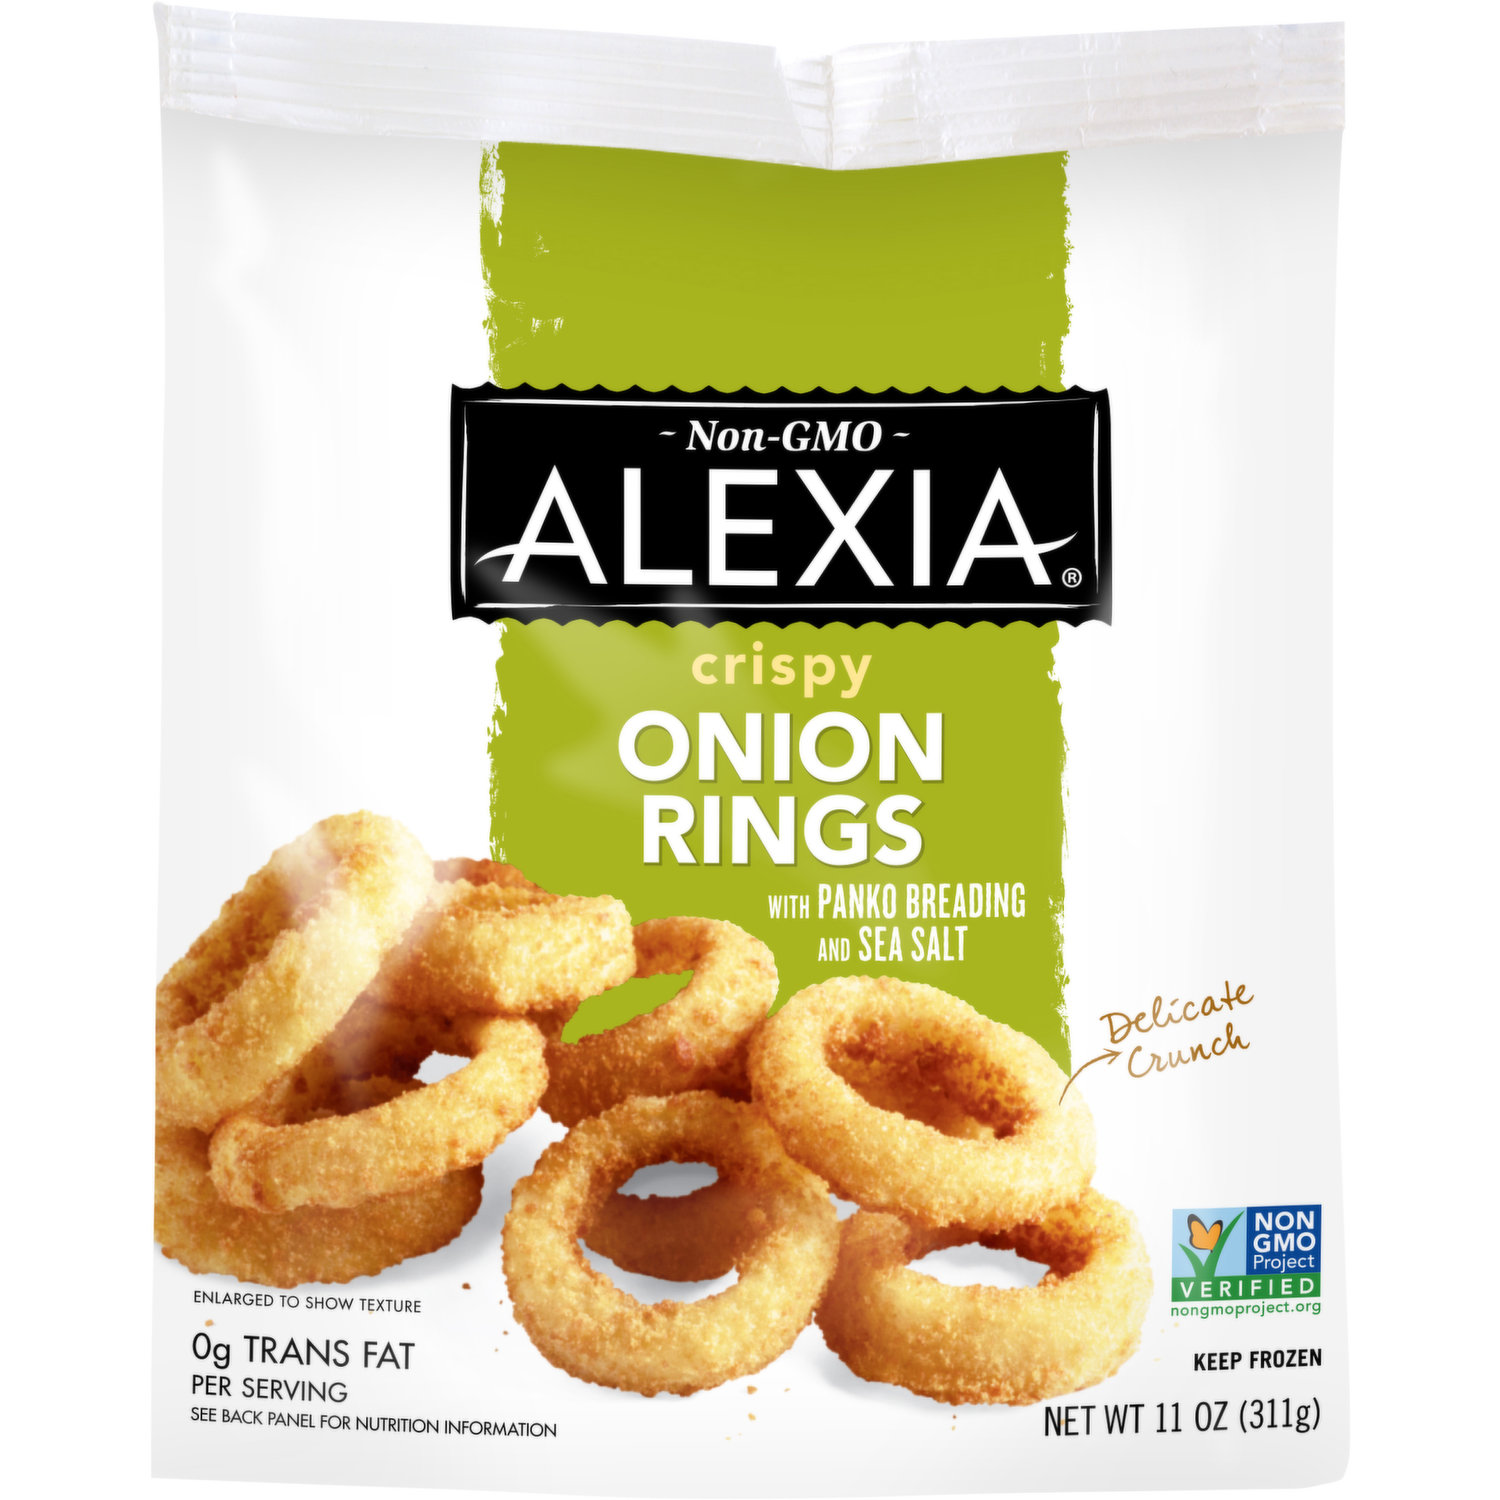 Mccain, Craft Beer Battered Onion Rings Nutrition Facts - Eat This Much